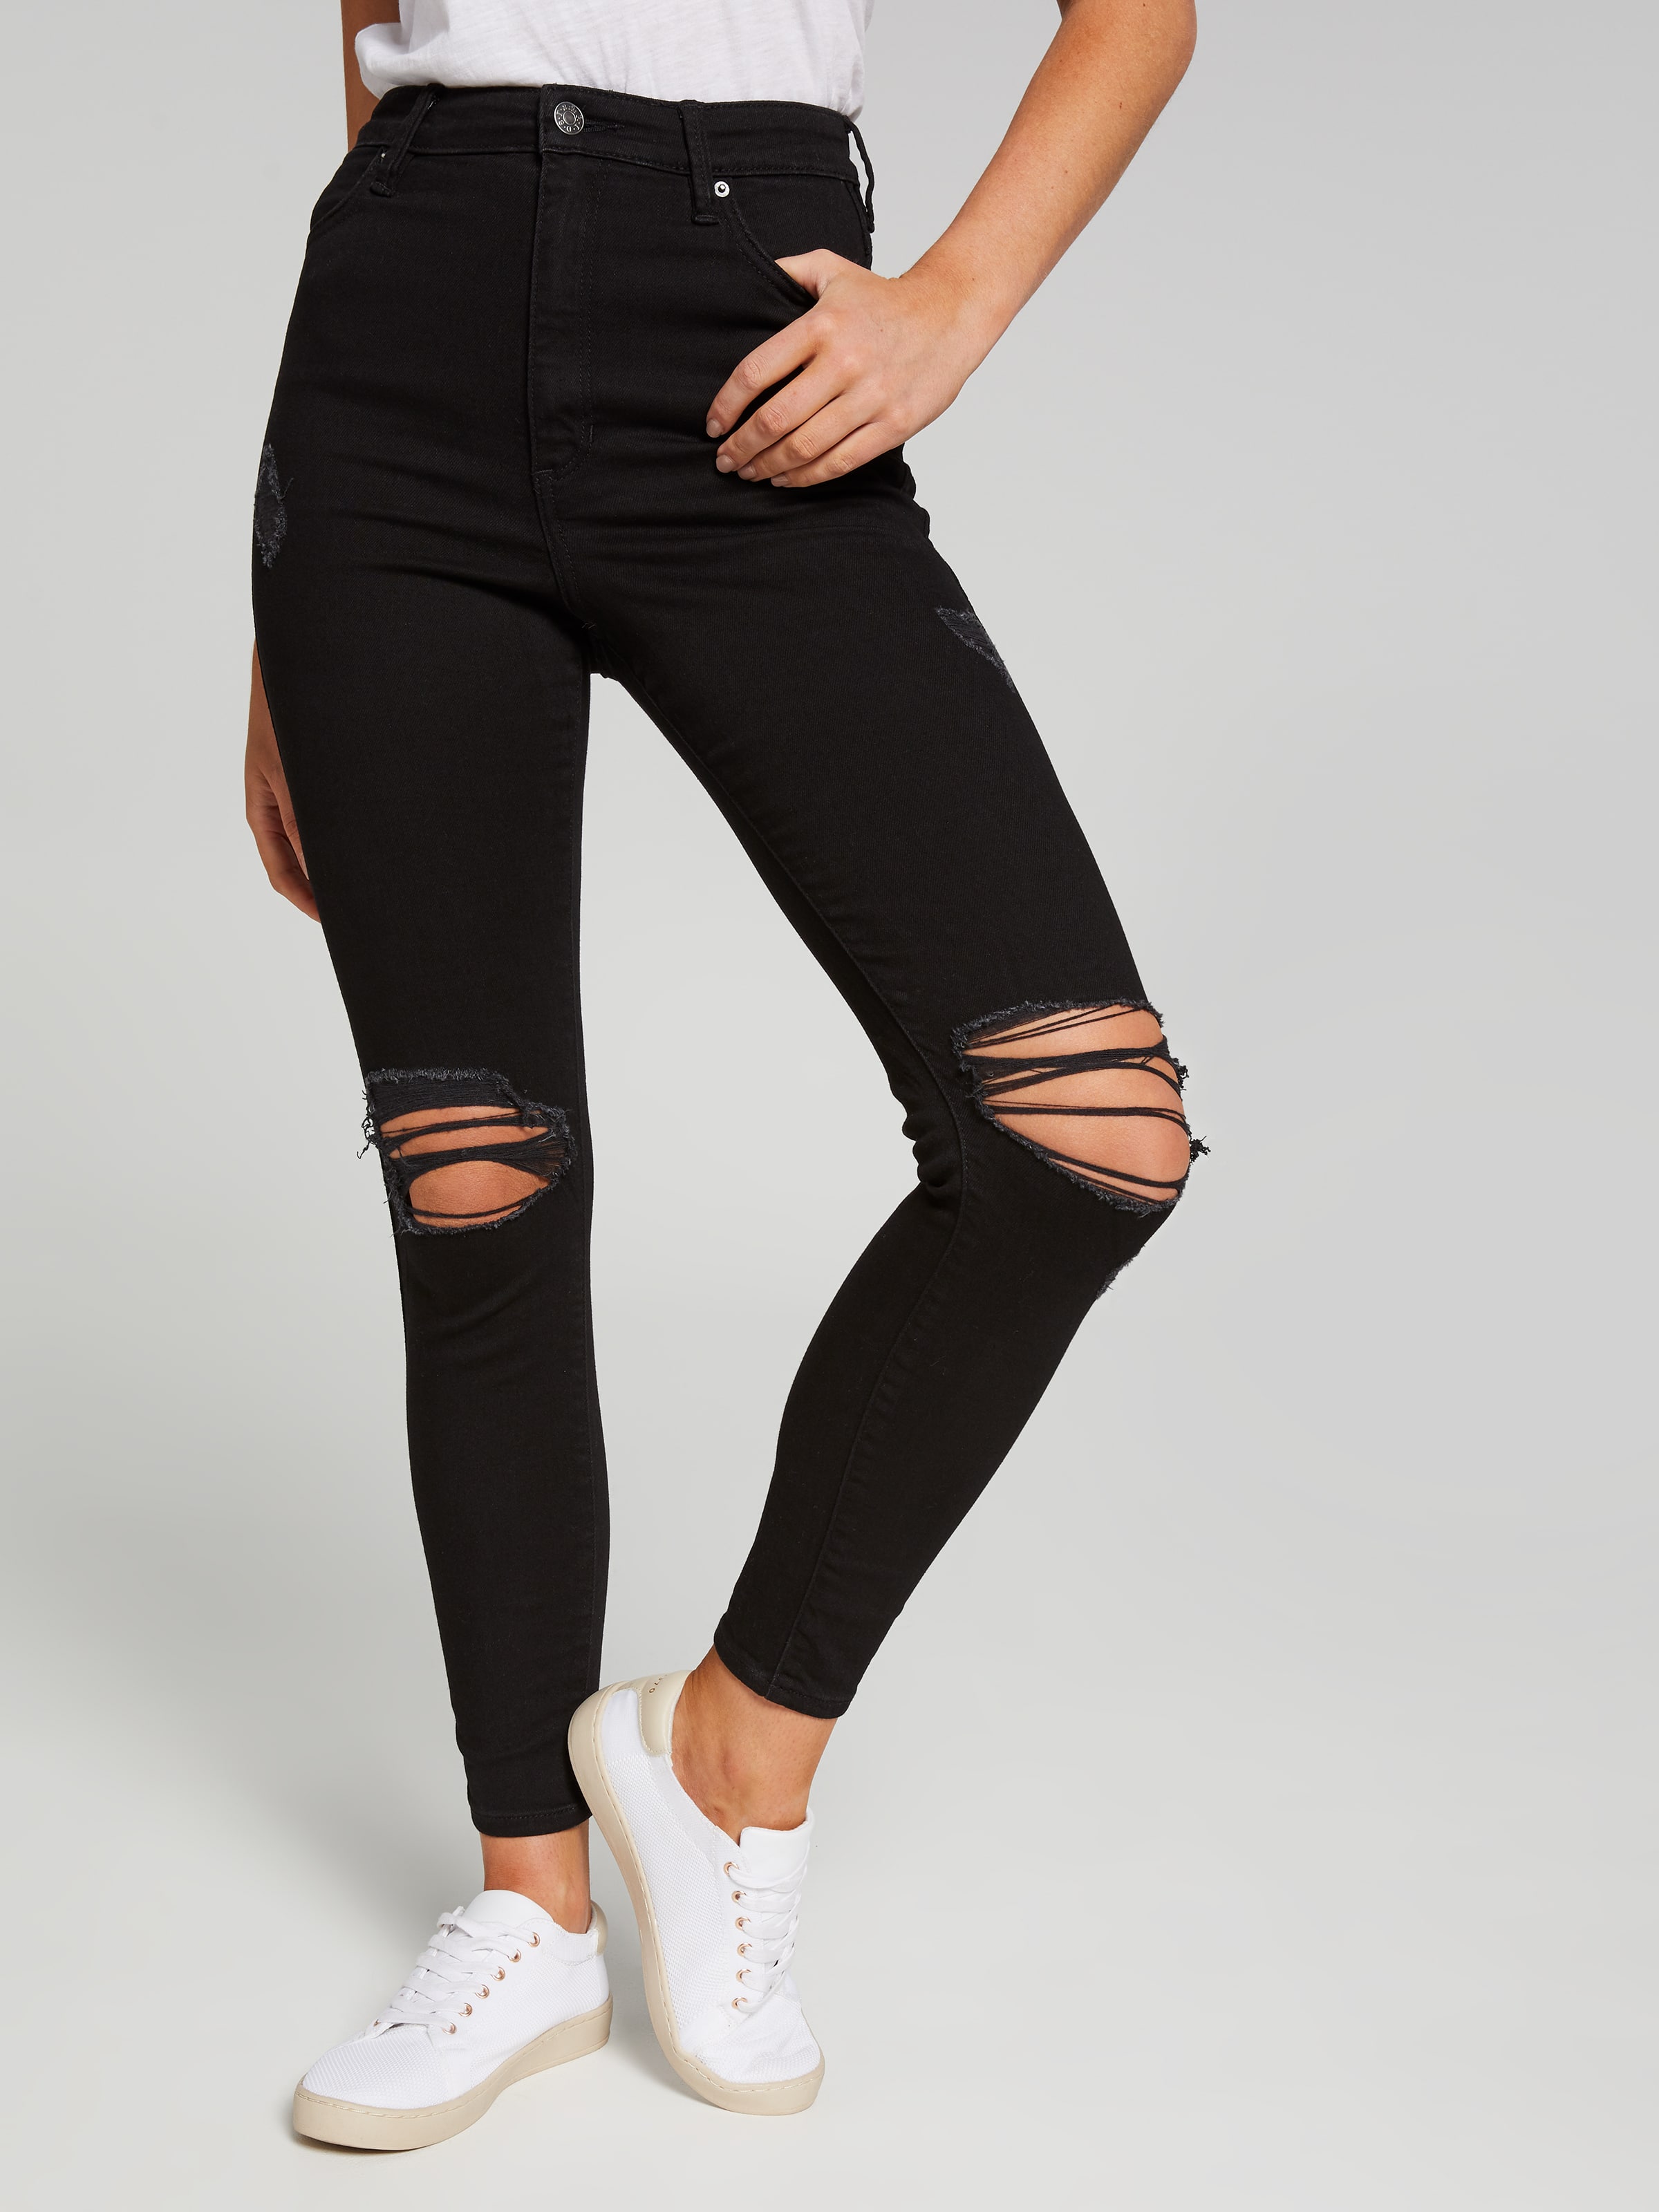 Express  High Waisted Black Curvy Flare Pant in Pitch Black